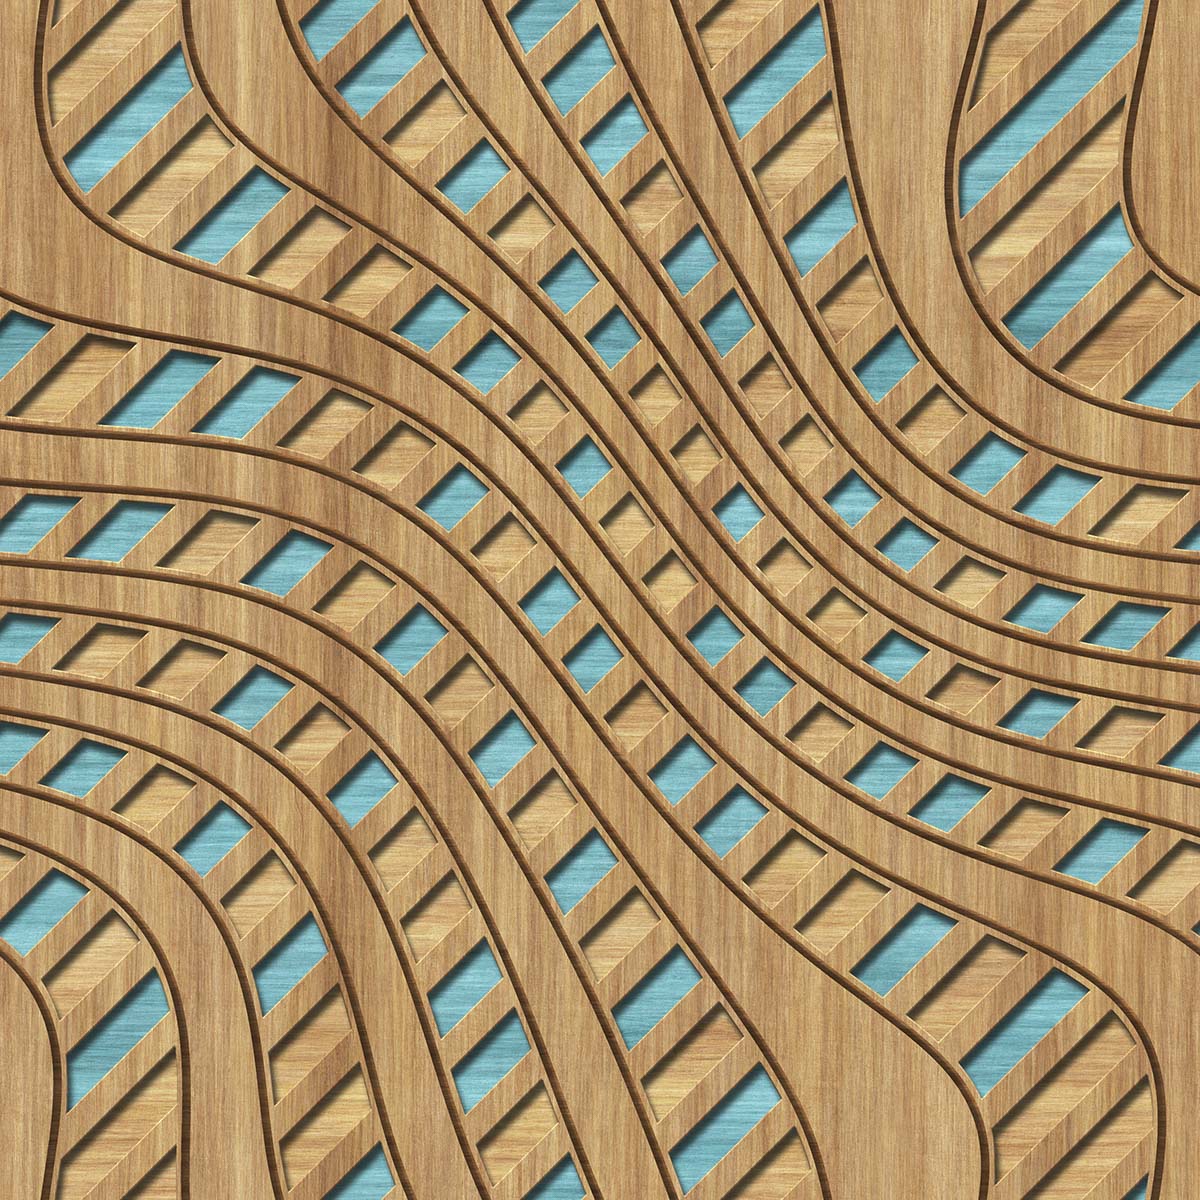 A wood panel with blue lines